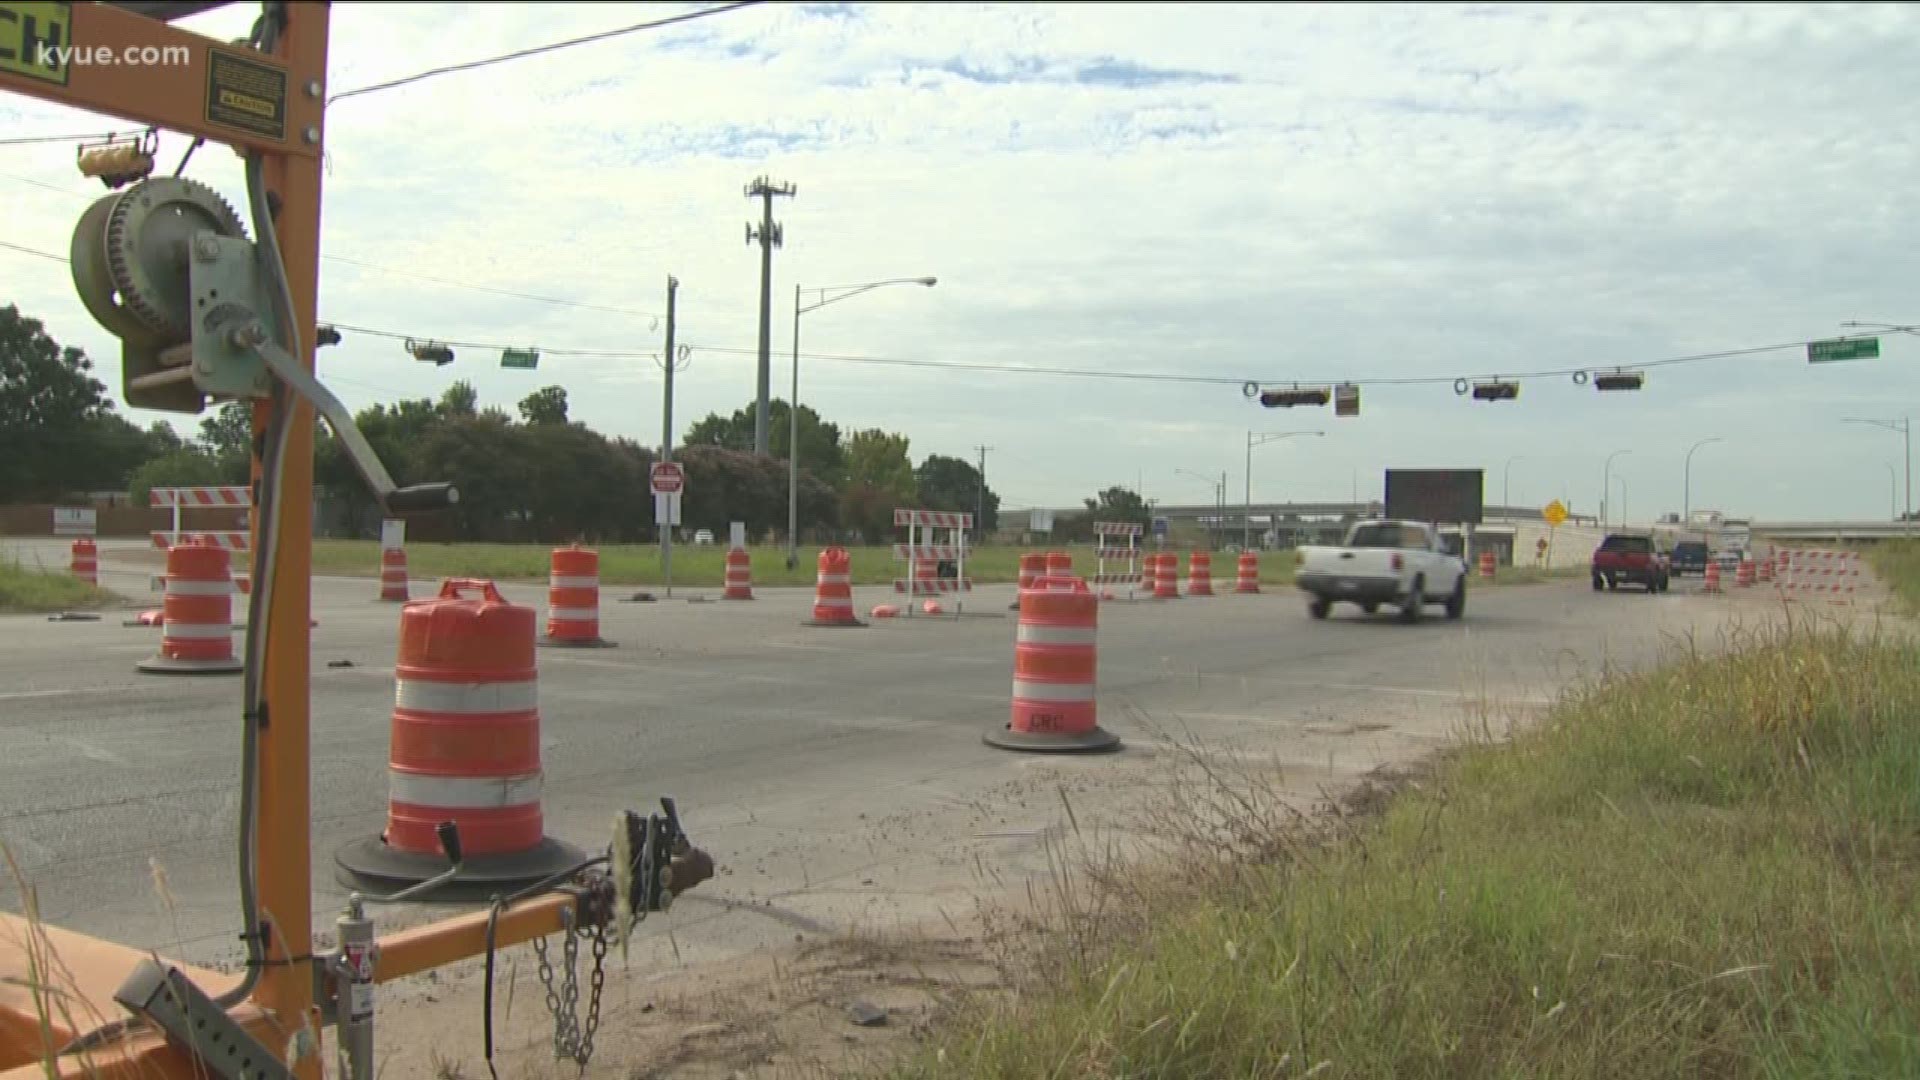 Your trip to the airport has gotten a lot more confusing this week. Traffic Reporter Anavid Reyes tells us all about the new phase of construction on Highway 183.